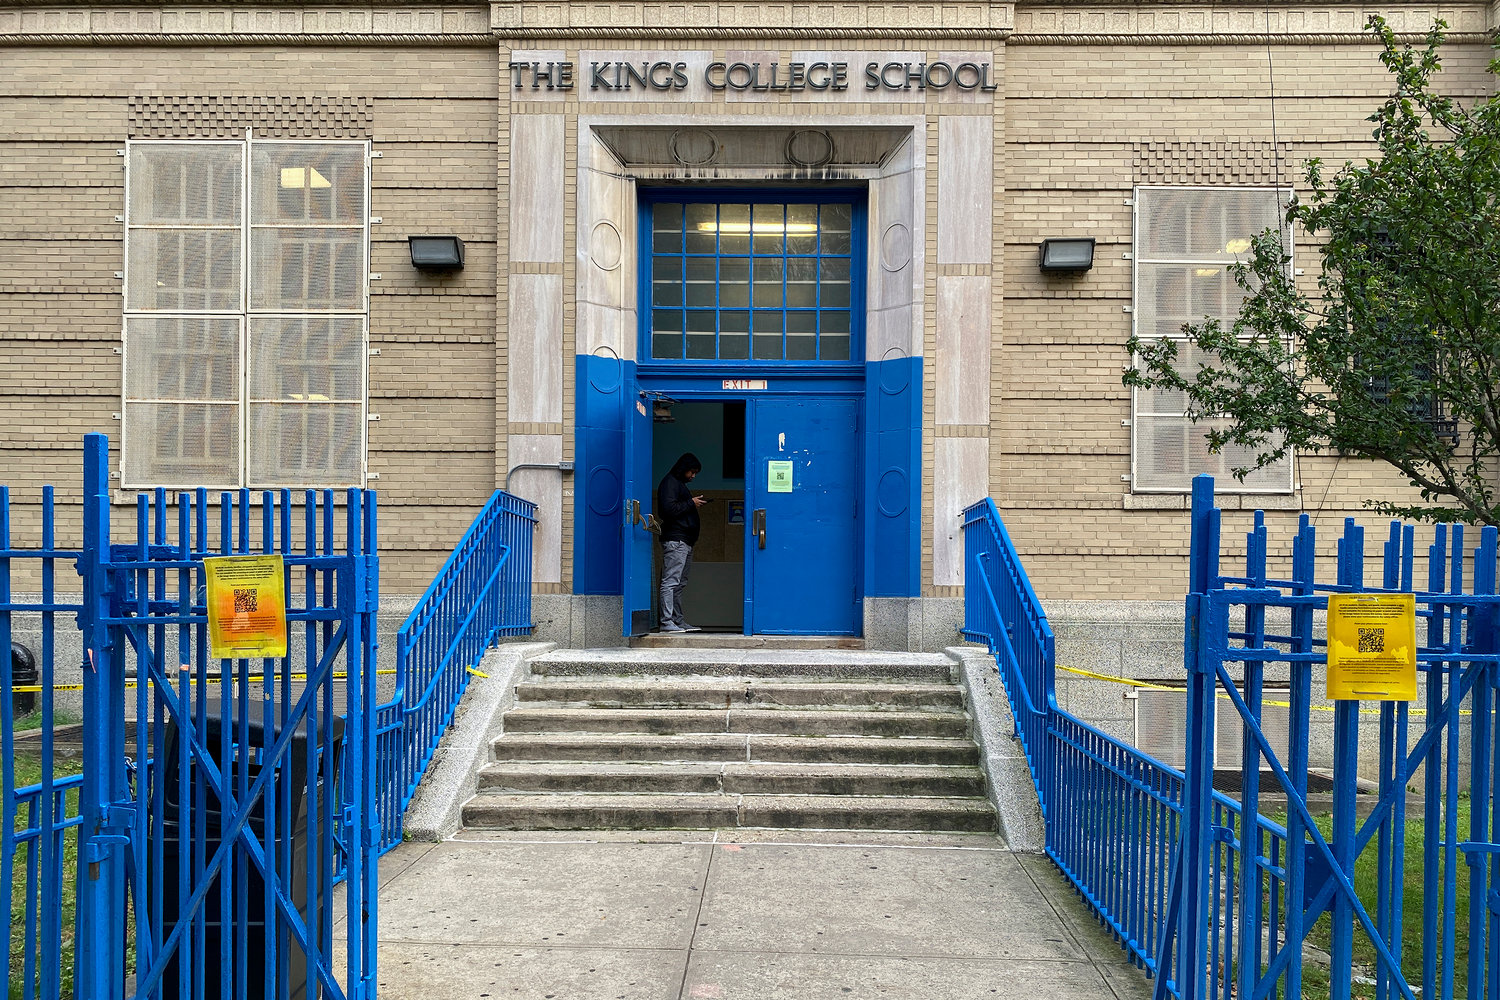 P.S. 94 Kings College School in Norwood is one of dozens of locations Mosholu Montefiore Community Center offers remote after-school and summer activities — many of them for free. But as staffing shortages continue on this side of the coronavirus pandemic, so does the waitlist grow for kids wanting to participate — now at more than 400.